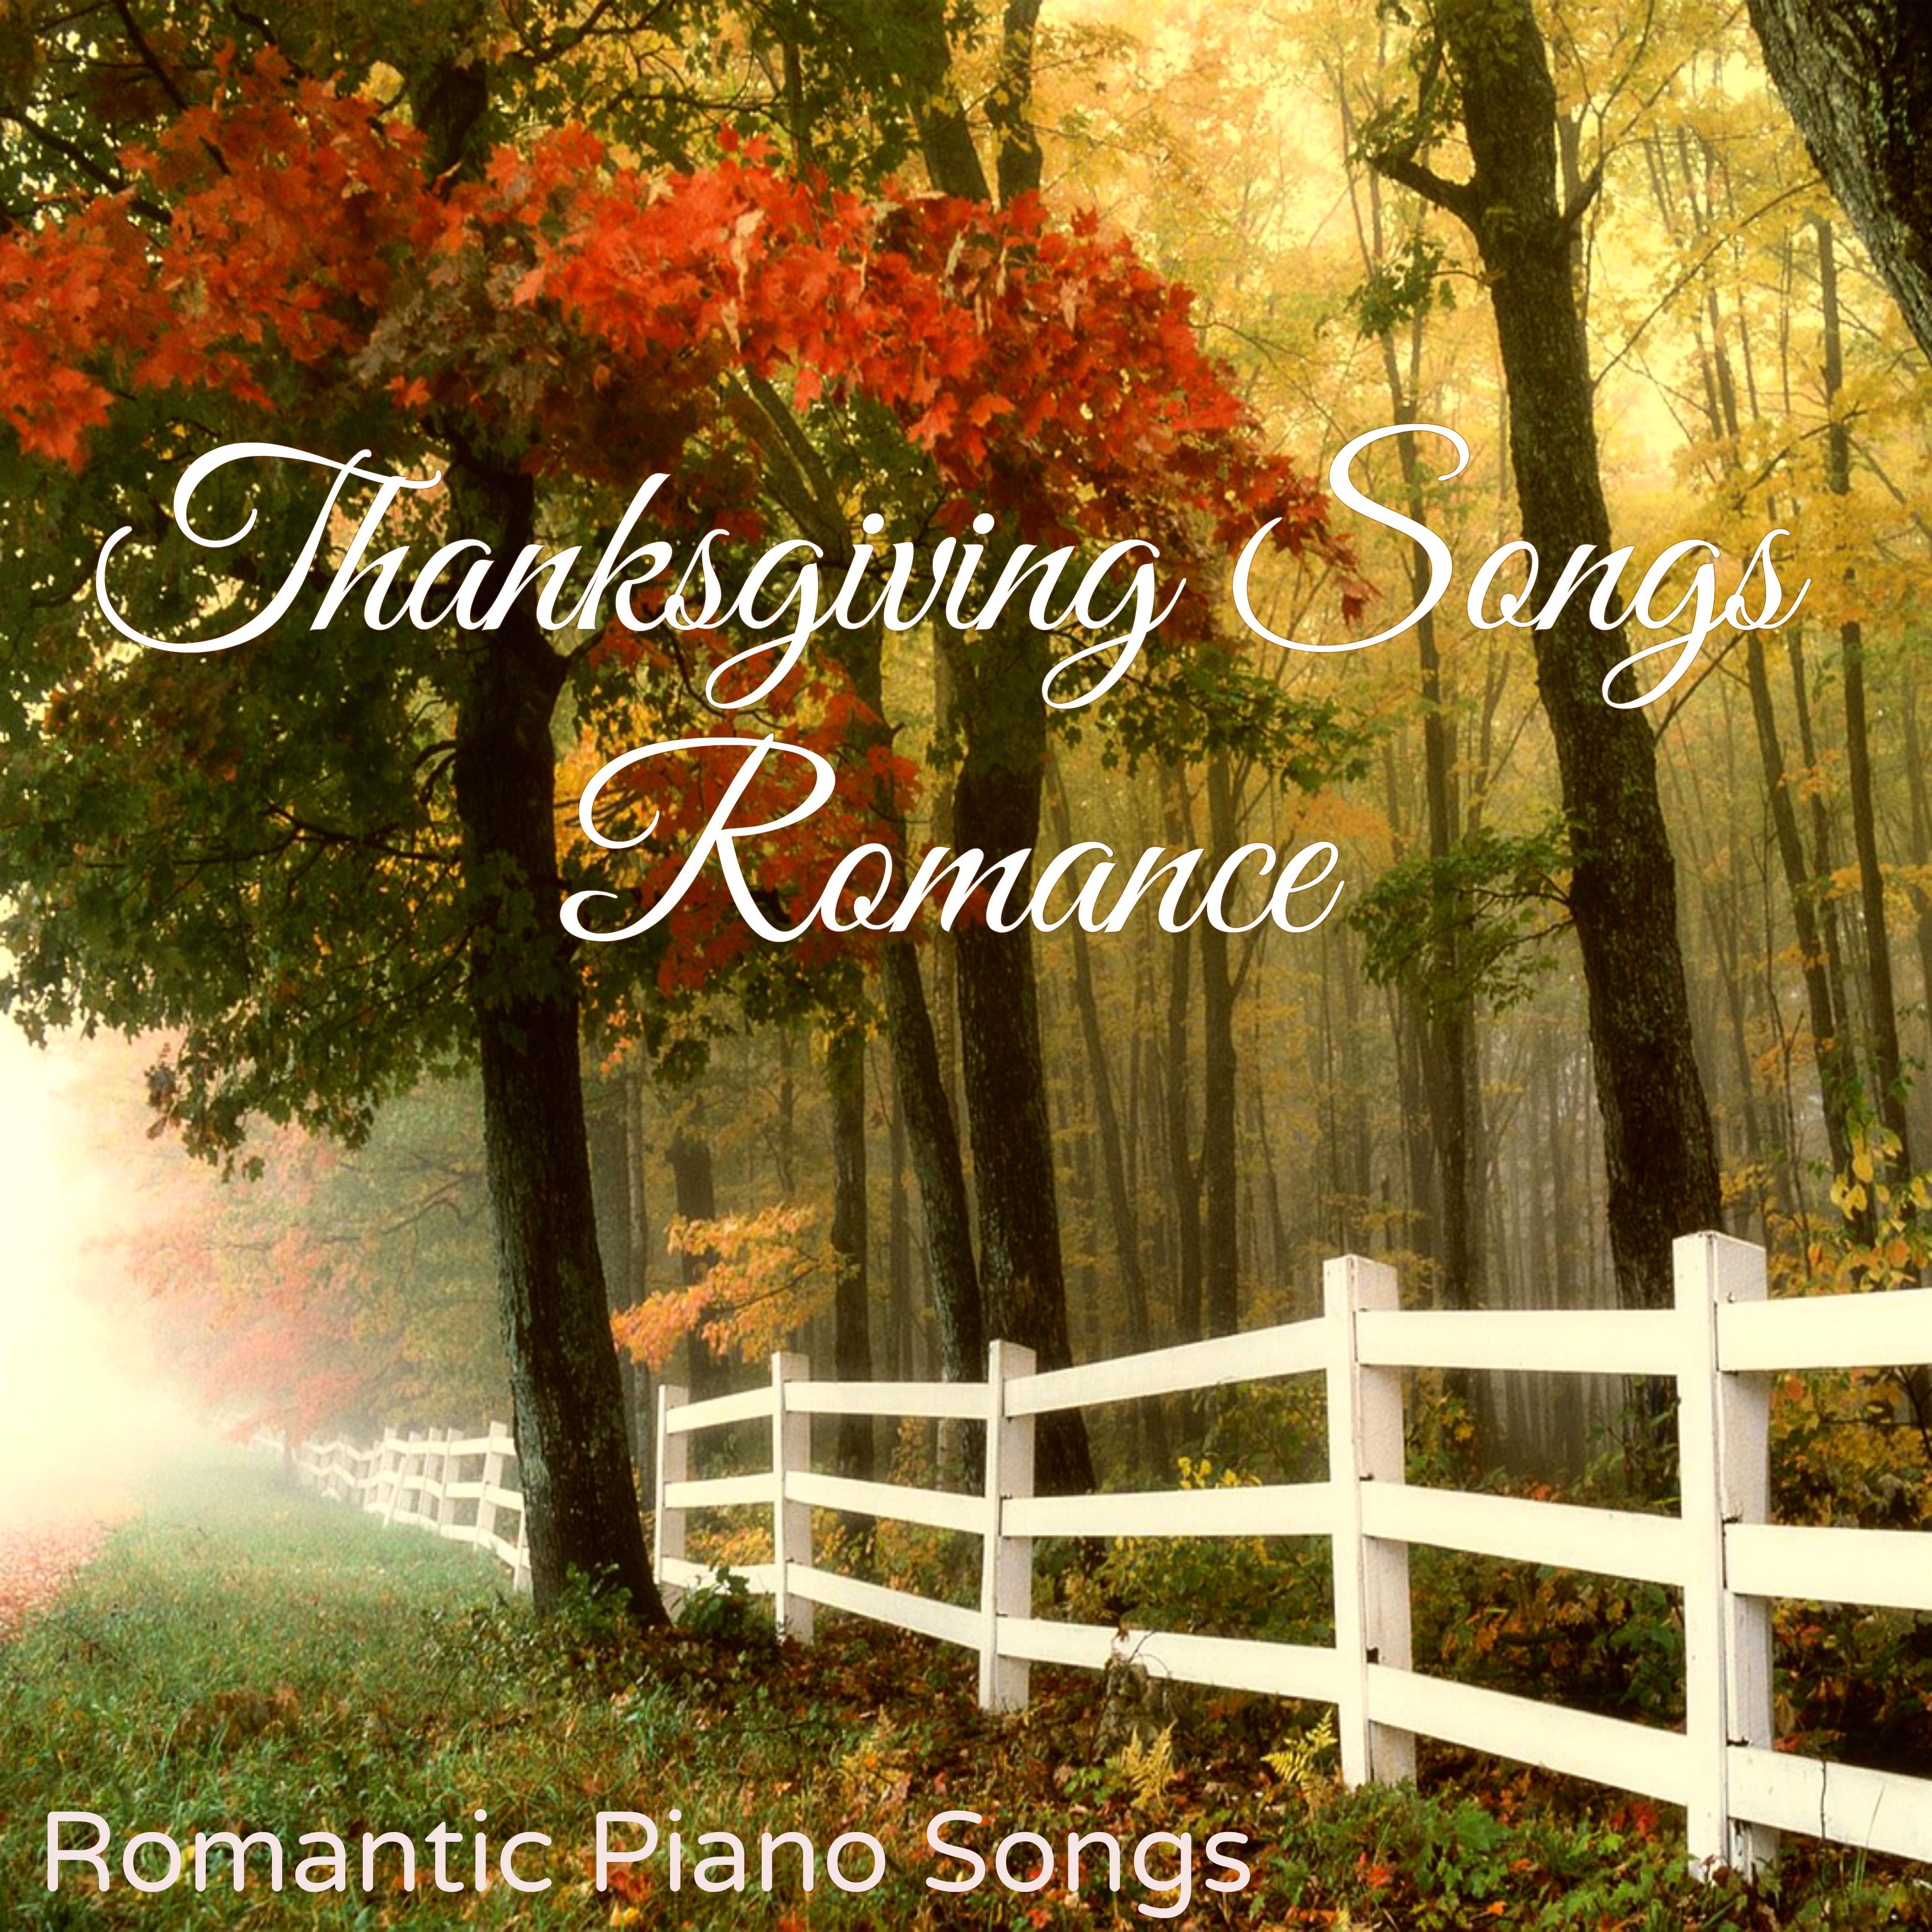 Thanksgiving Songs Romance – Romantic Piano Songs for Thanksgiving Day of Love and Mercy